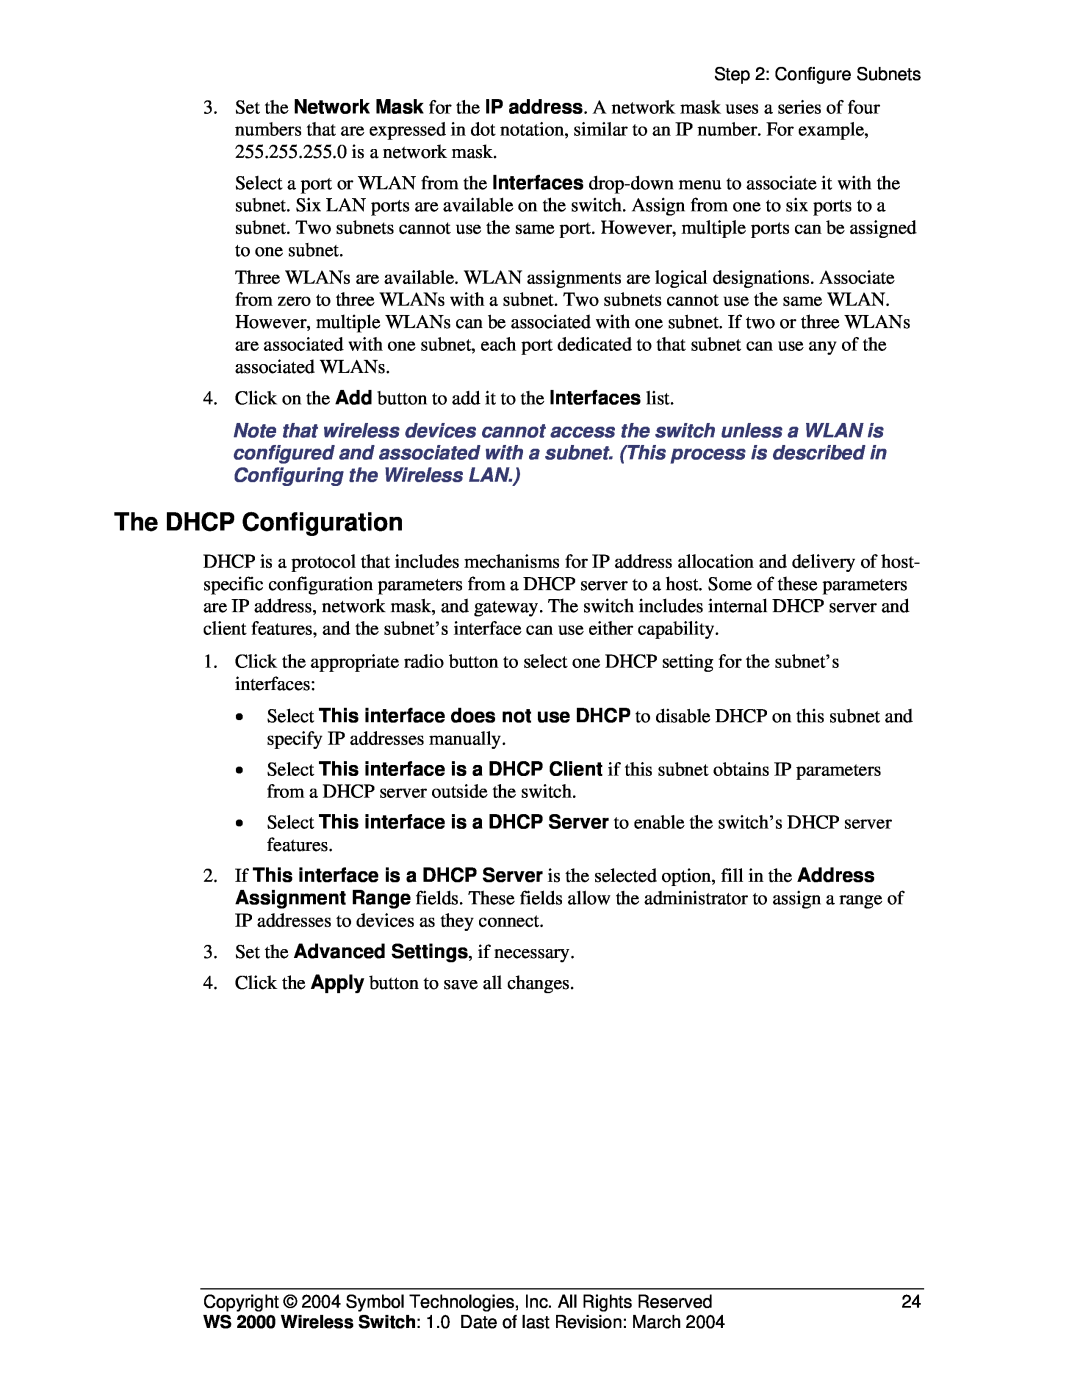 Symbol Technologies WS 2000 manual The DHCP Configuration 